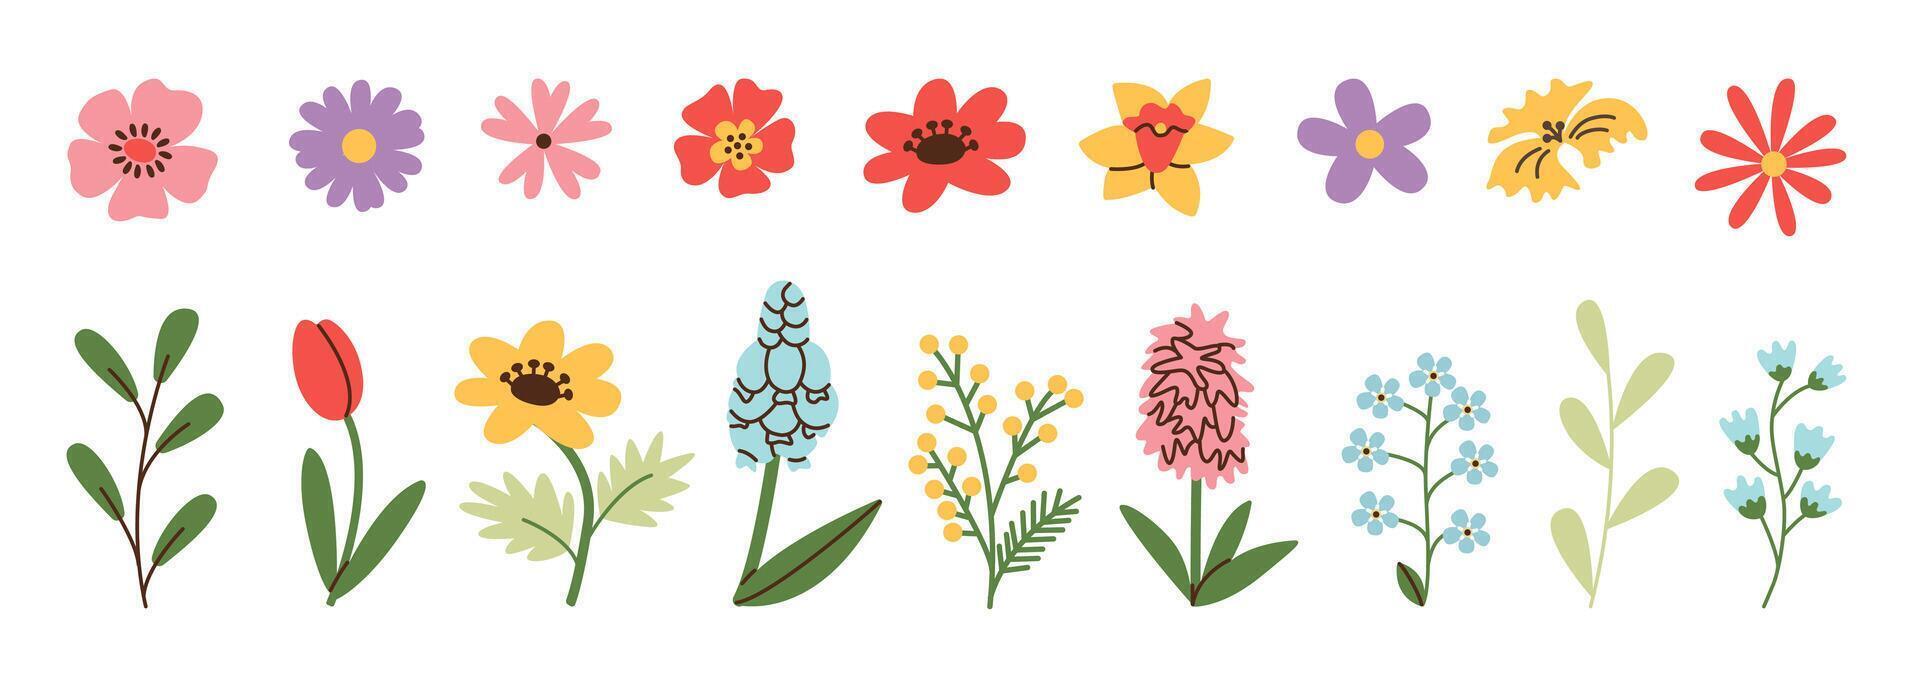 Spring and summer flowers set. Simple doodle flower plants isolated on white background. Colorful flat vector illustration.